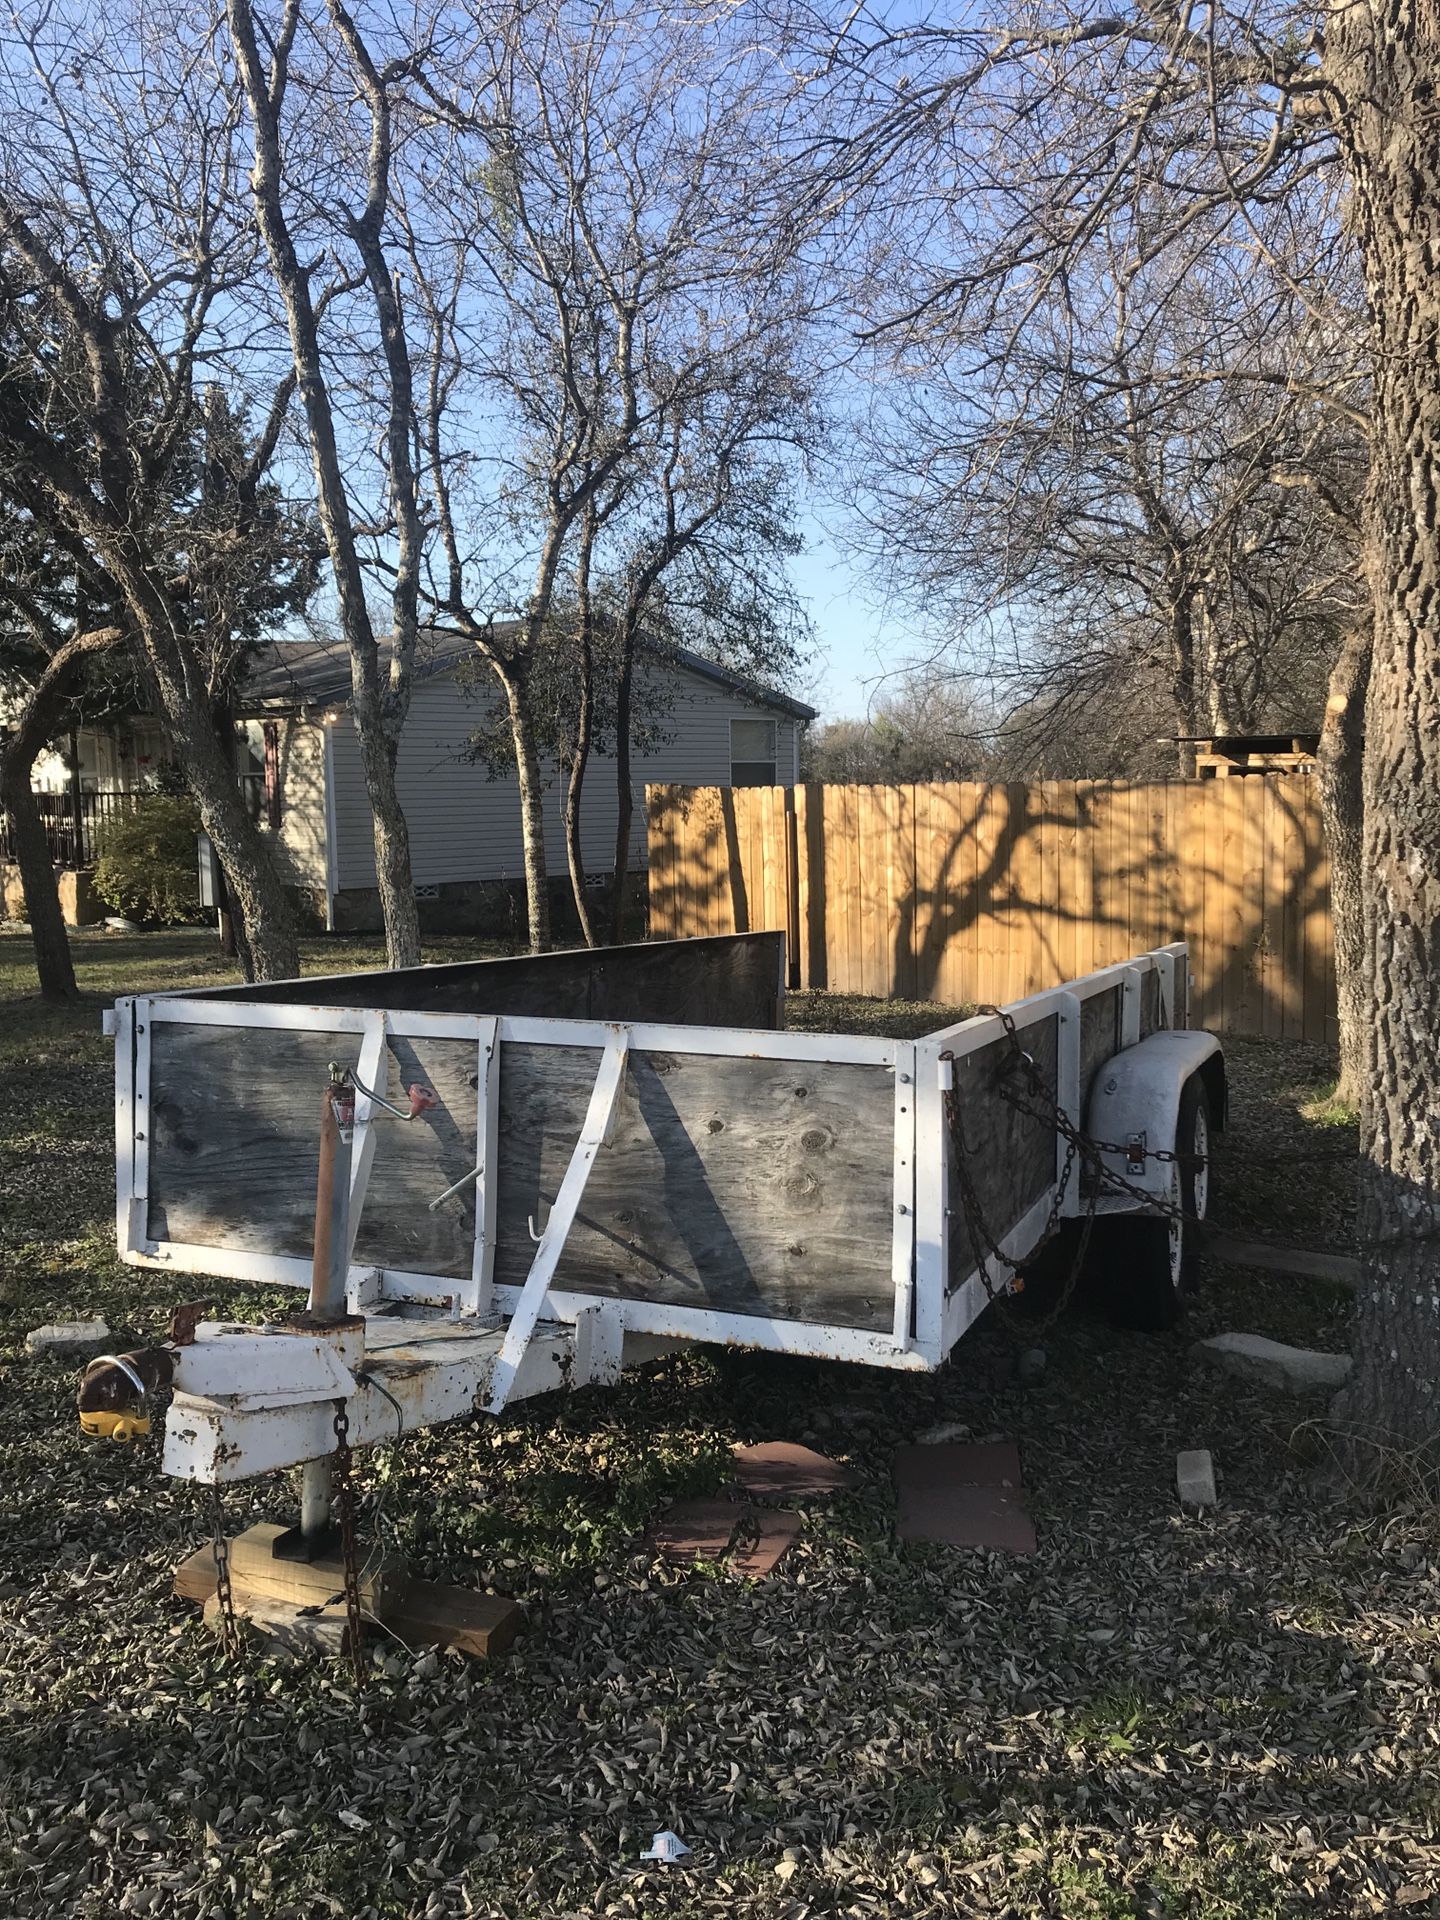 Trailer for sale 16ft x 6.6ft